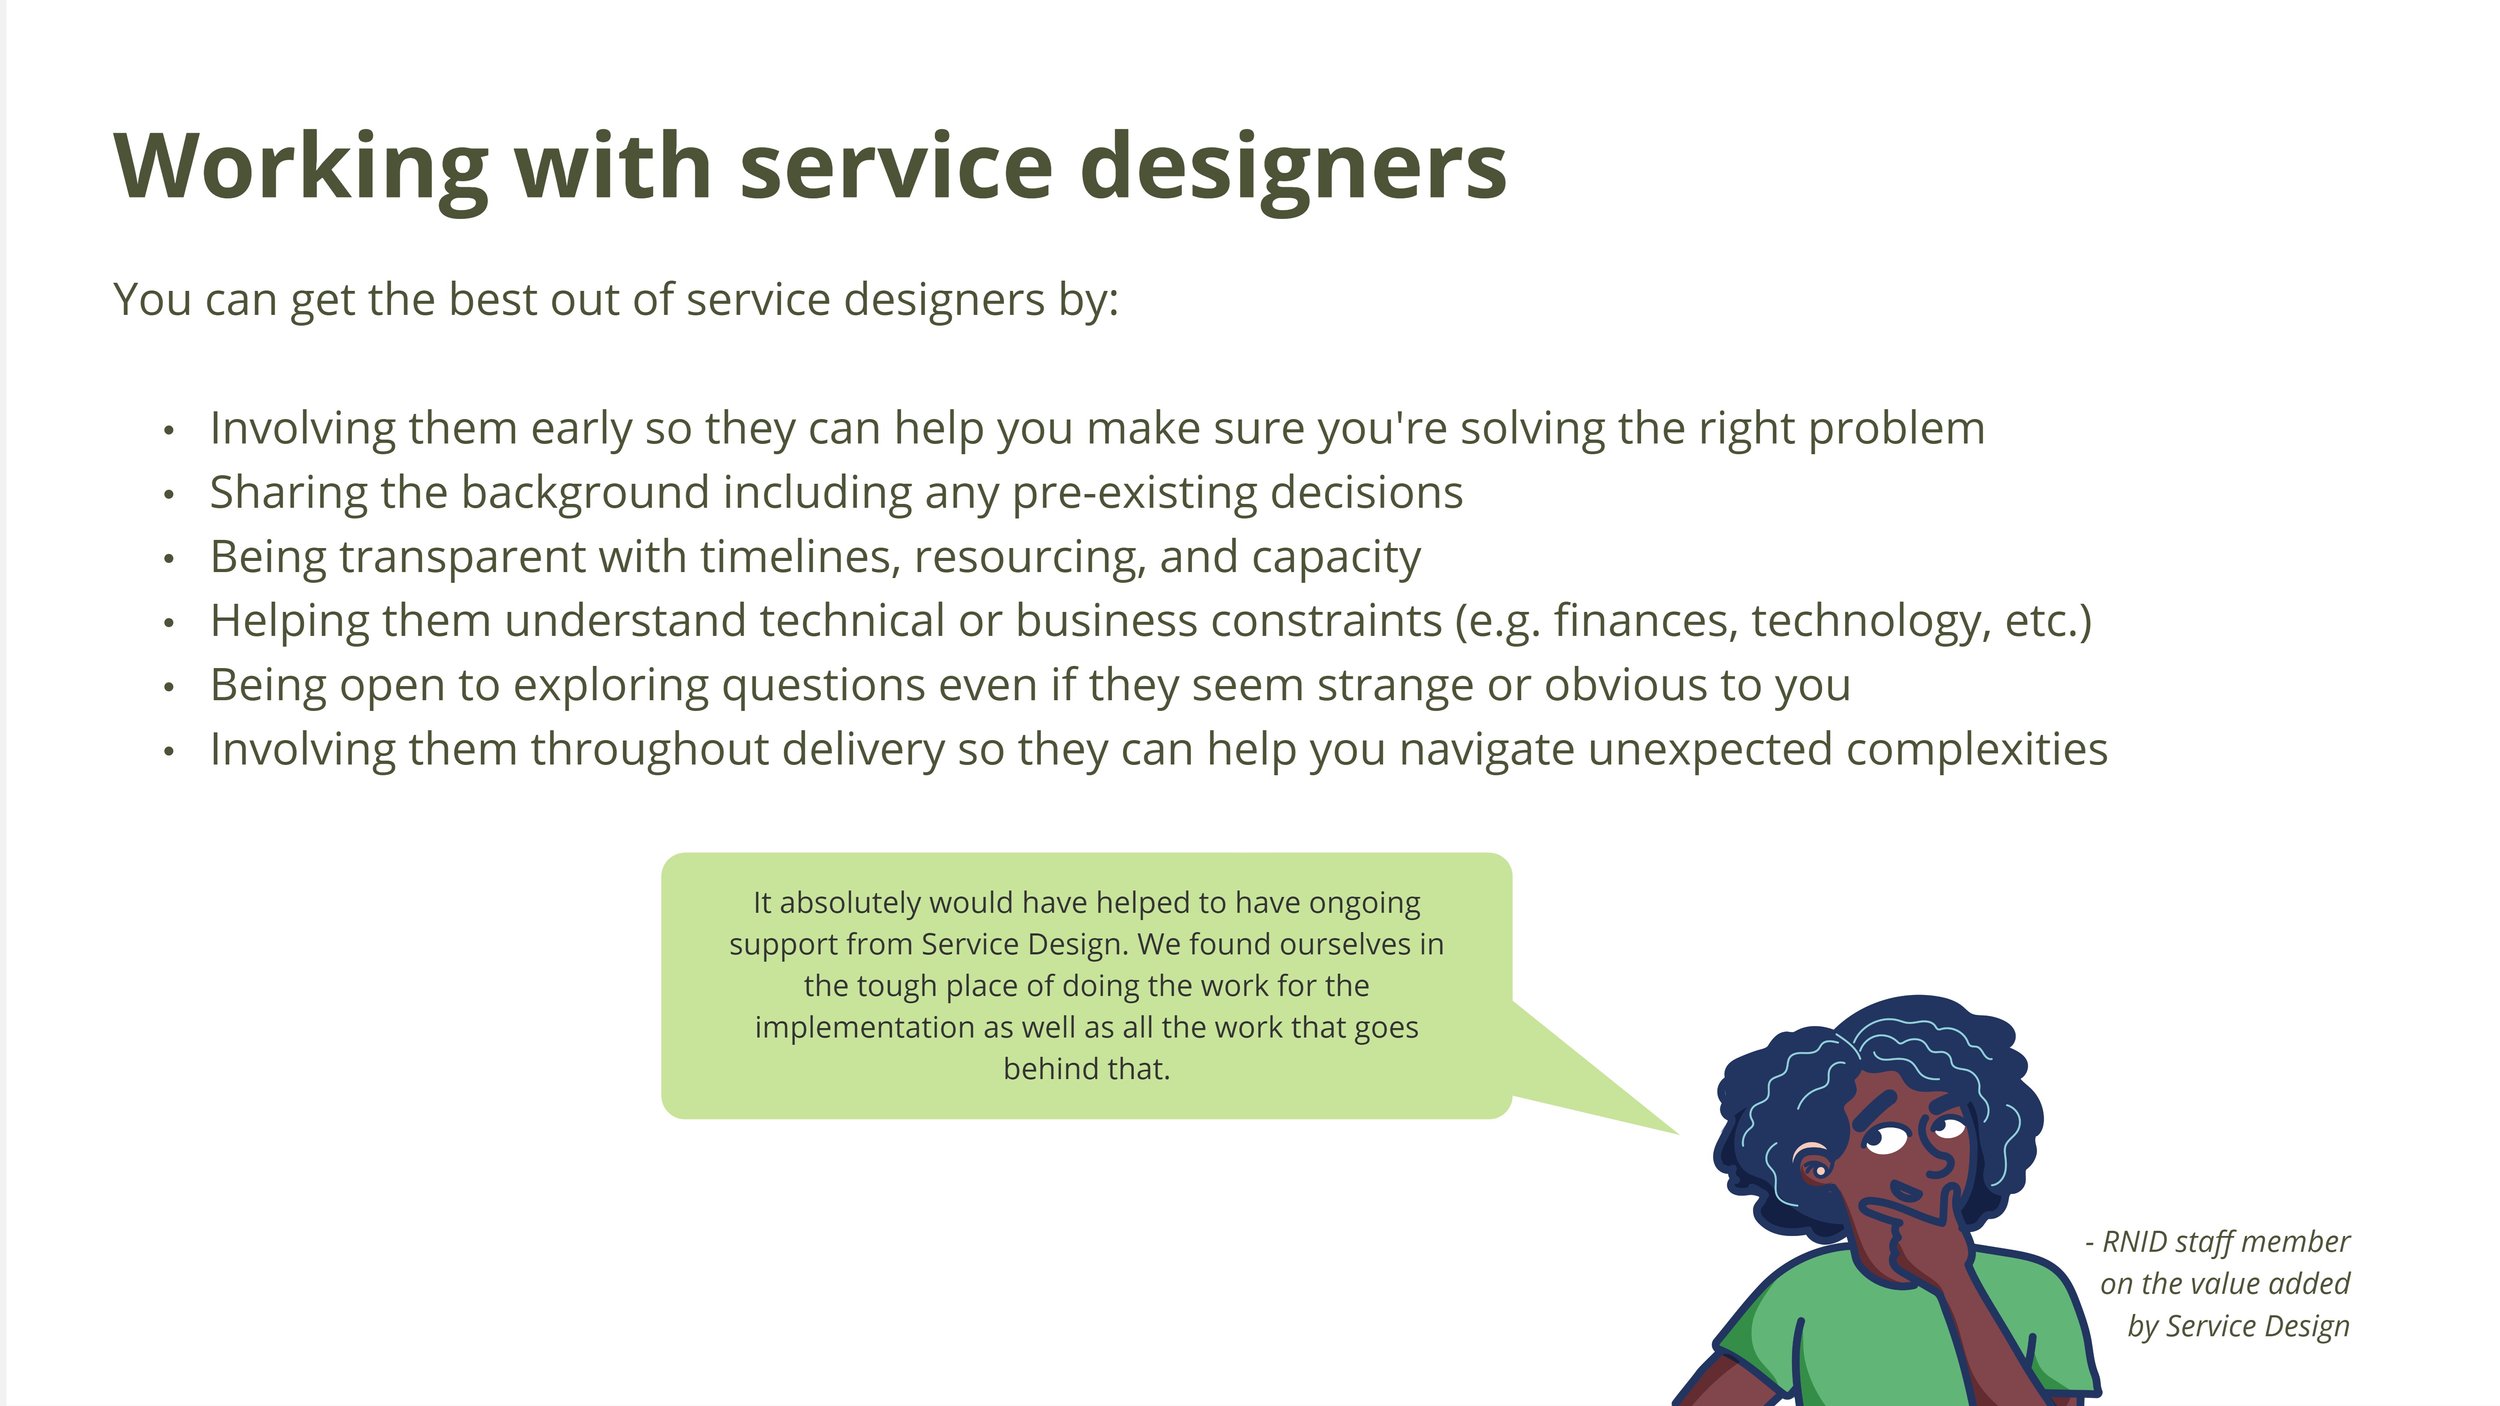 Service Design - Stakeholder interview synthesis - Working with service designers 2.jpg